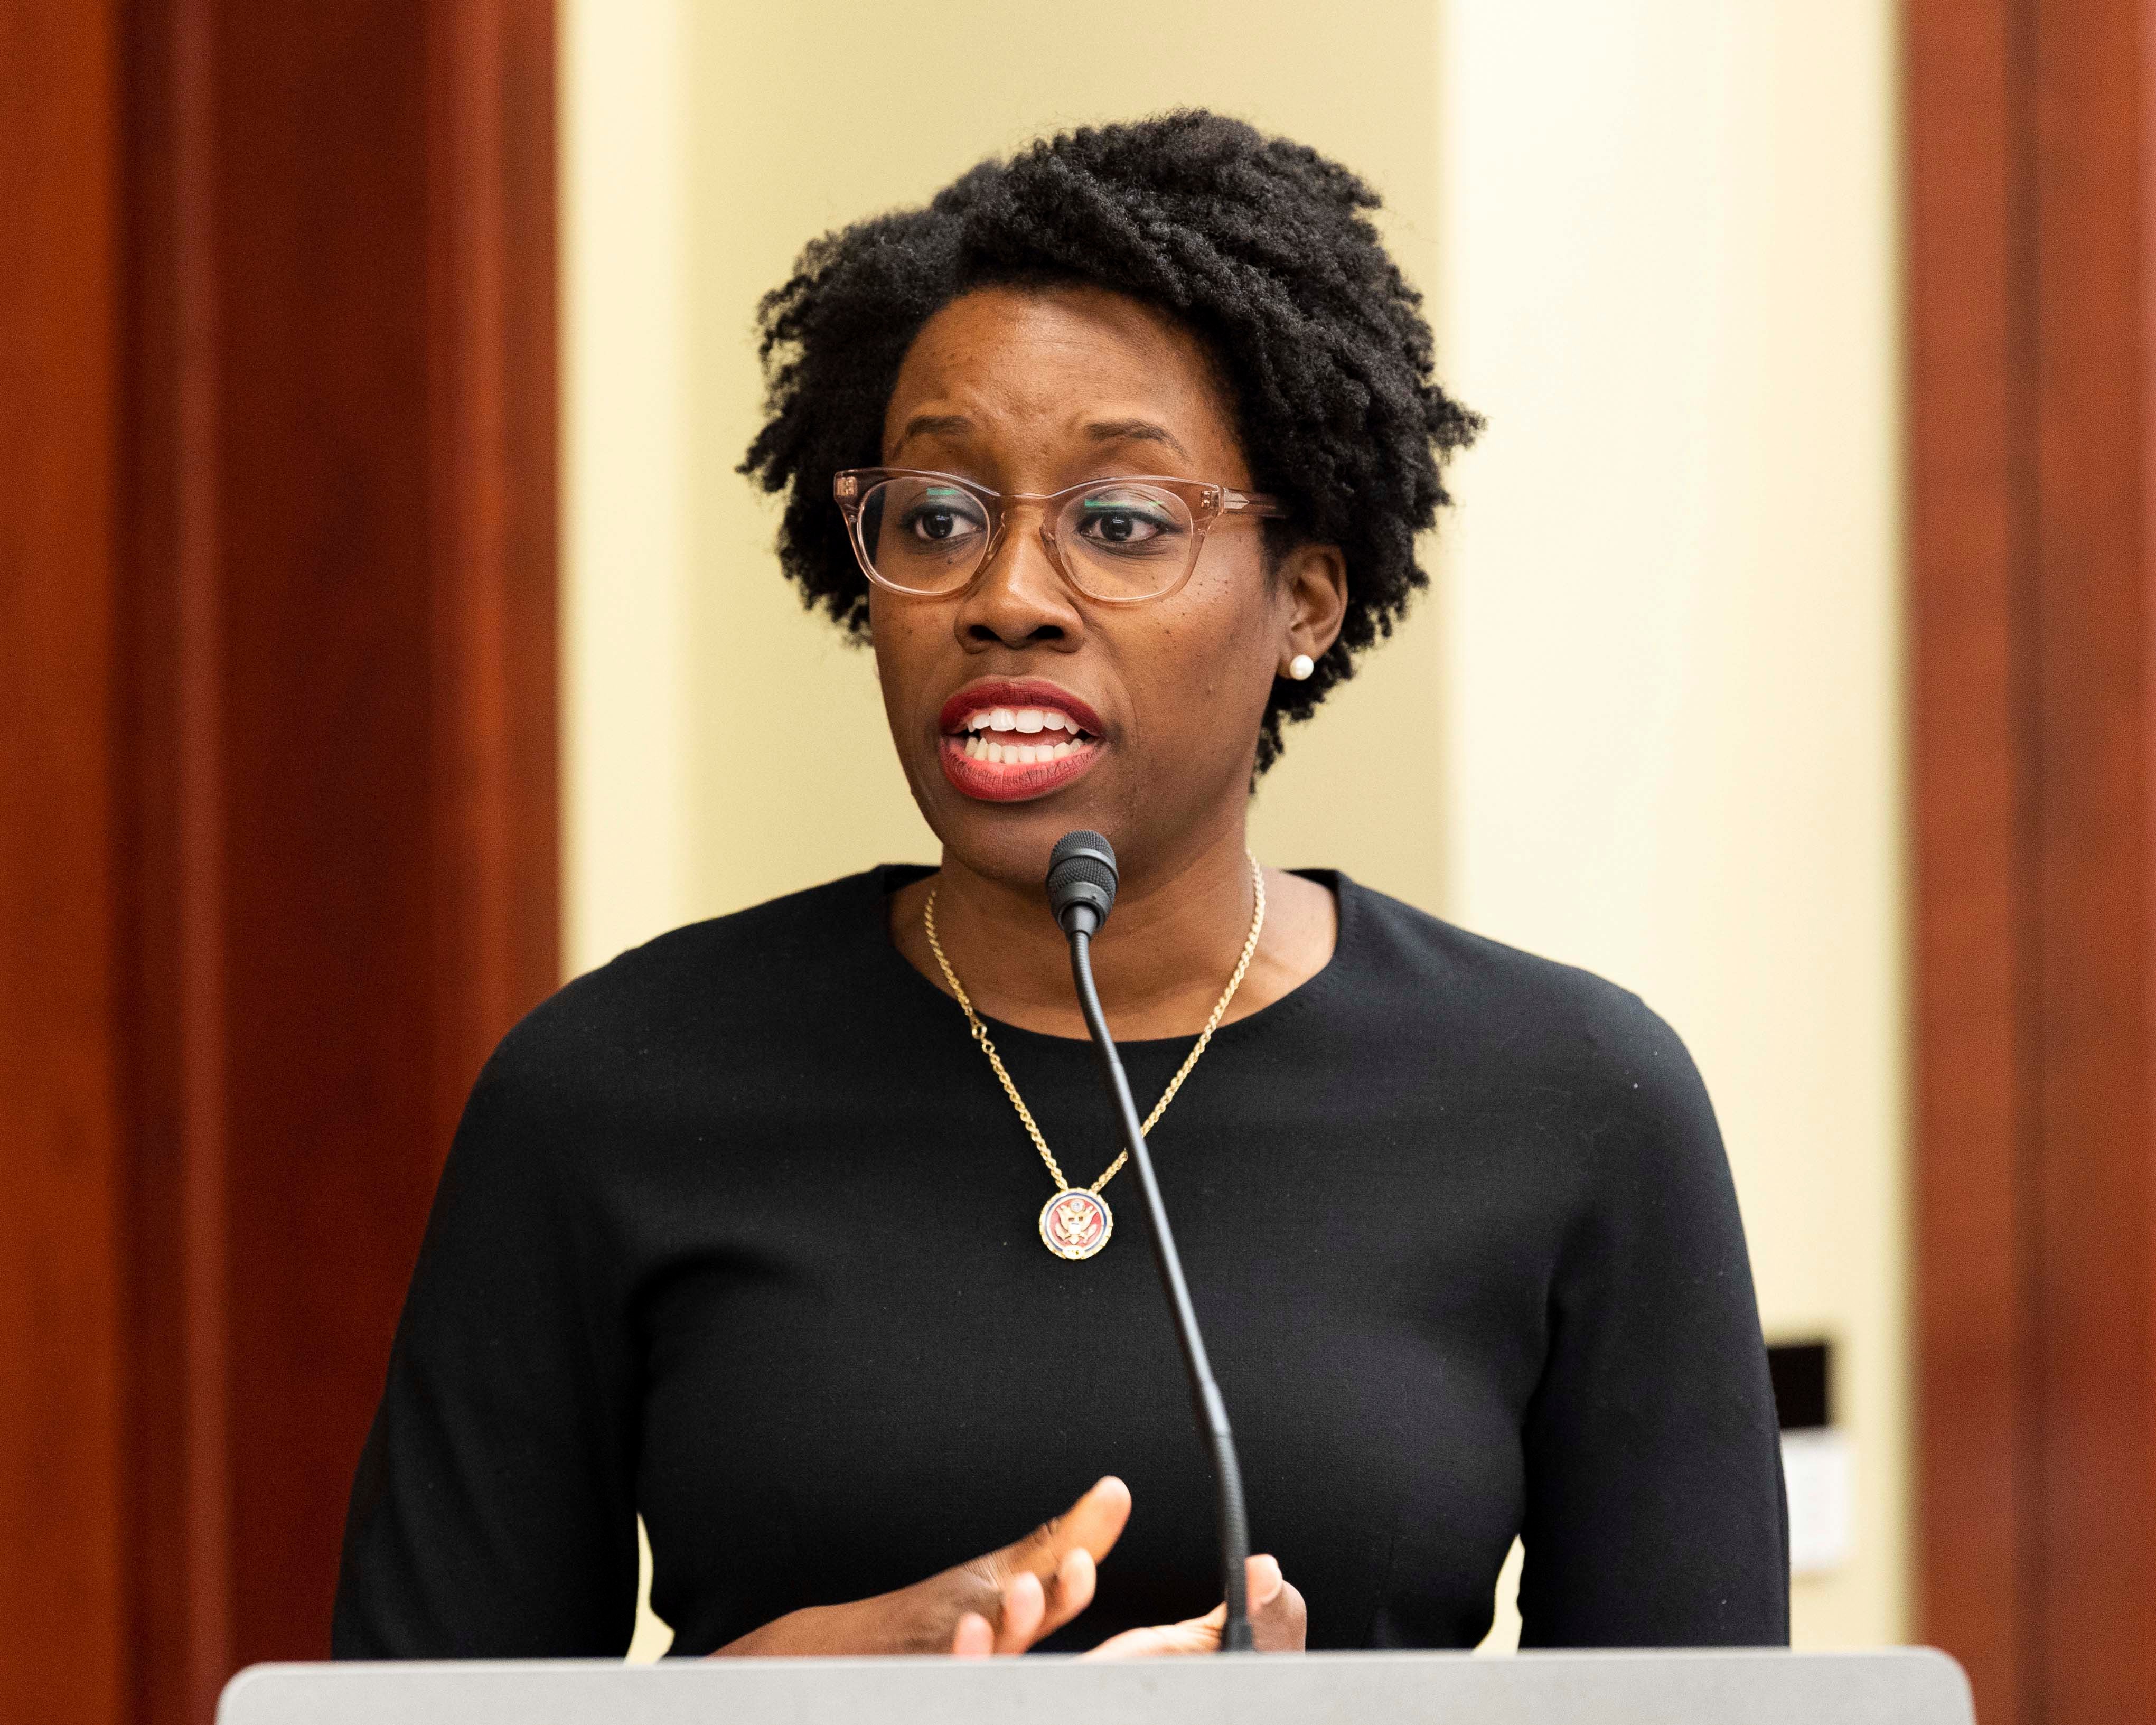 U.S. Representative Lauren Underwood (D-IL), co-founder and co-chair of the Black Maternal Health Caucus,  speaking at the Black Maternal Health Caucus Stakeholder Summit at the Capitol in Washington, DC on July 11, 2019.  © 2020 Sipa USA via AP (Photo by Michael Brochstein)